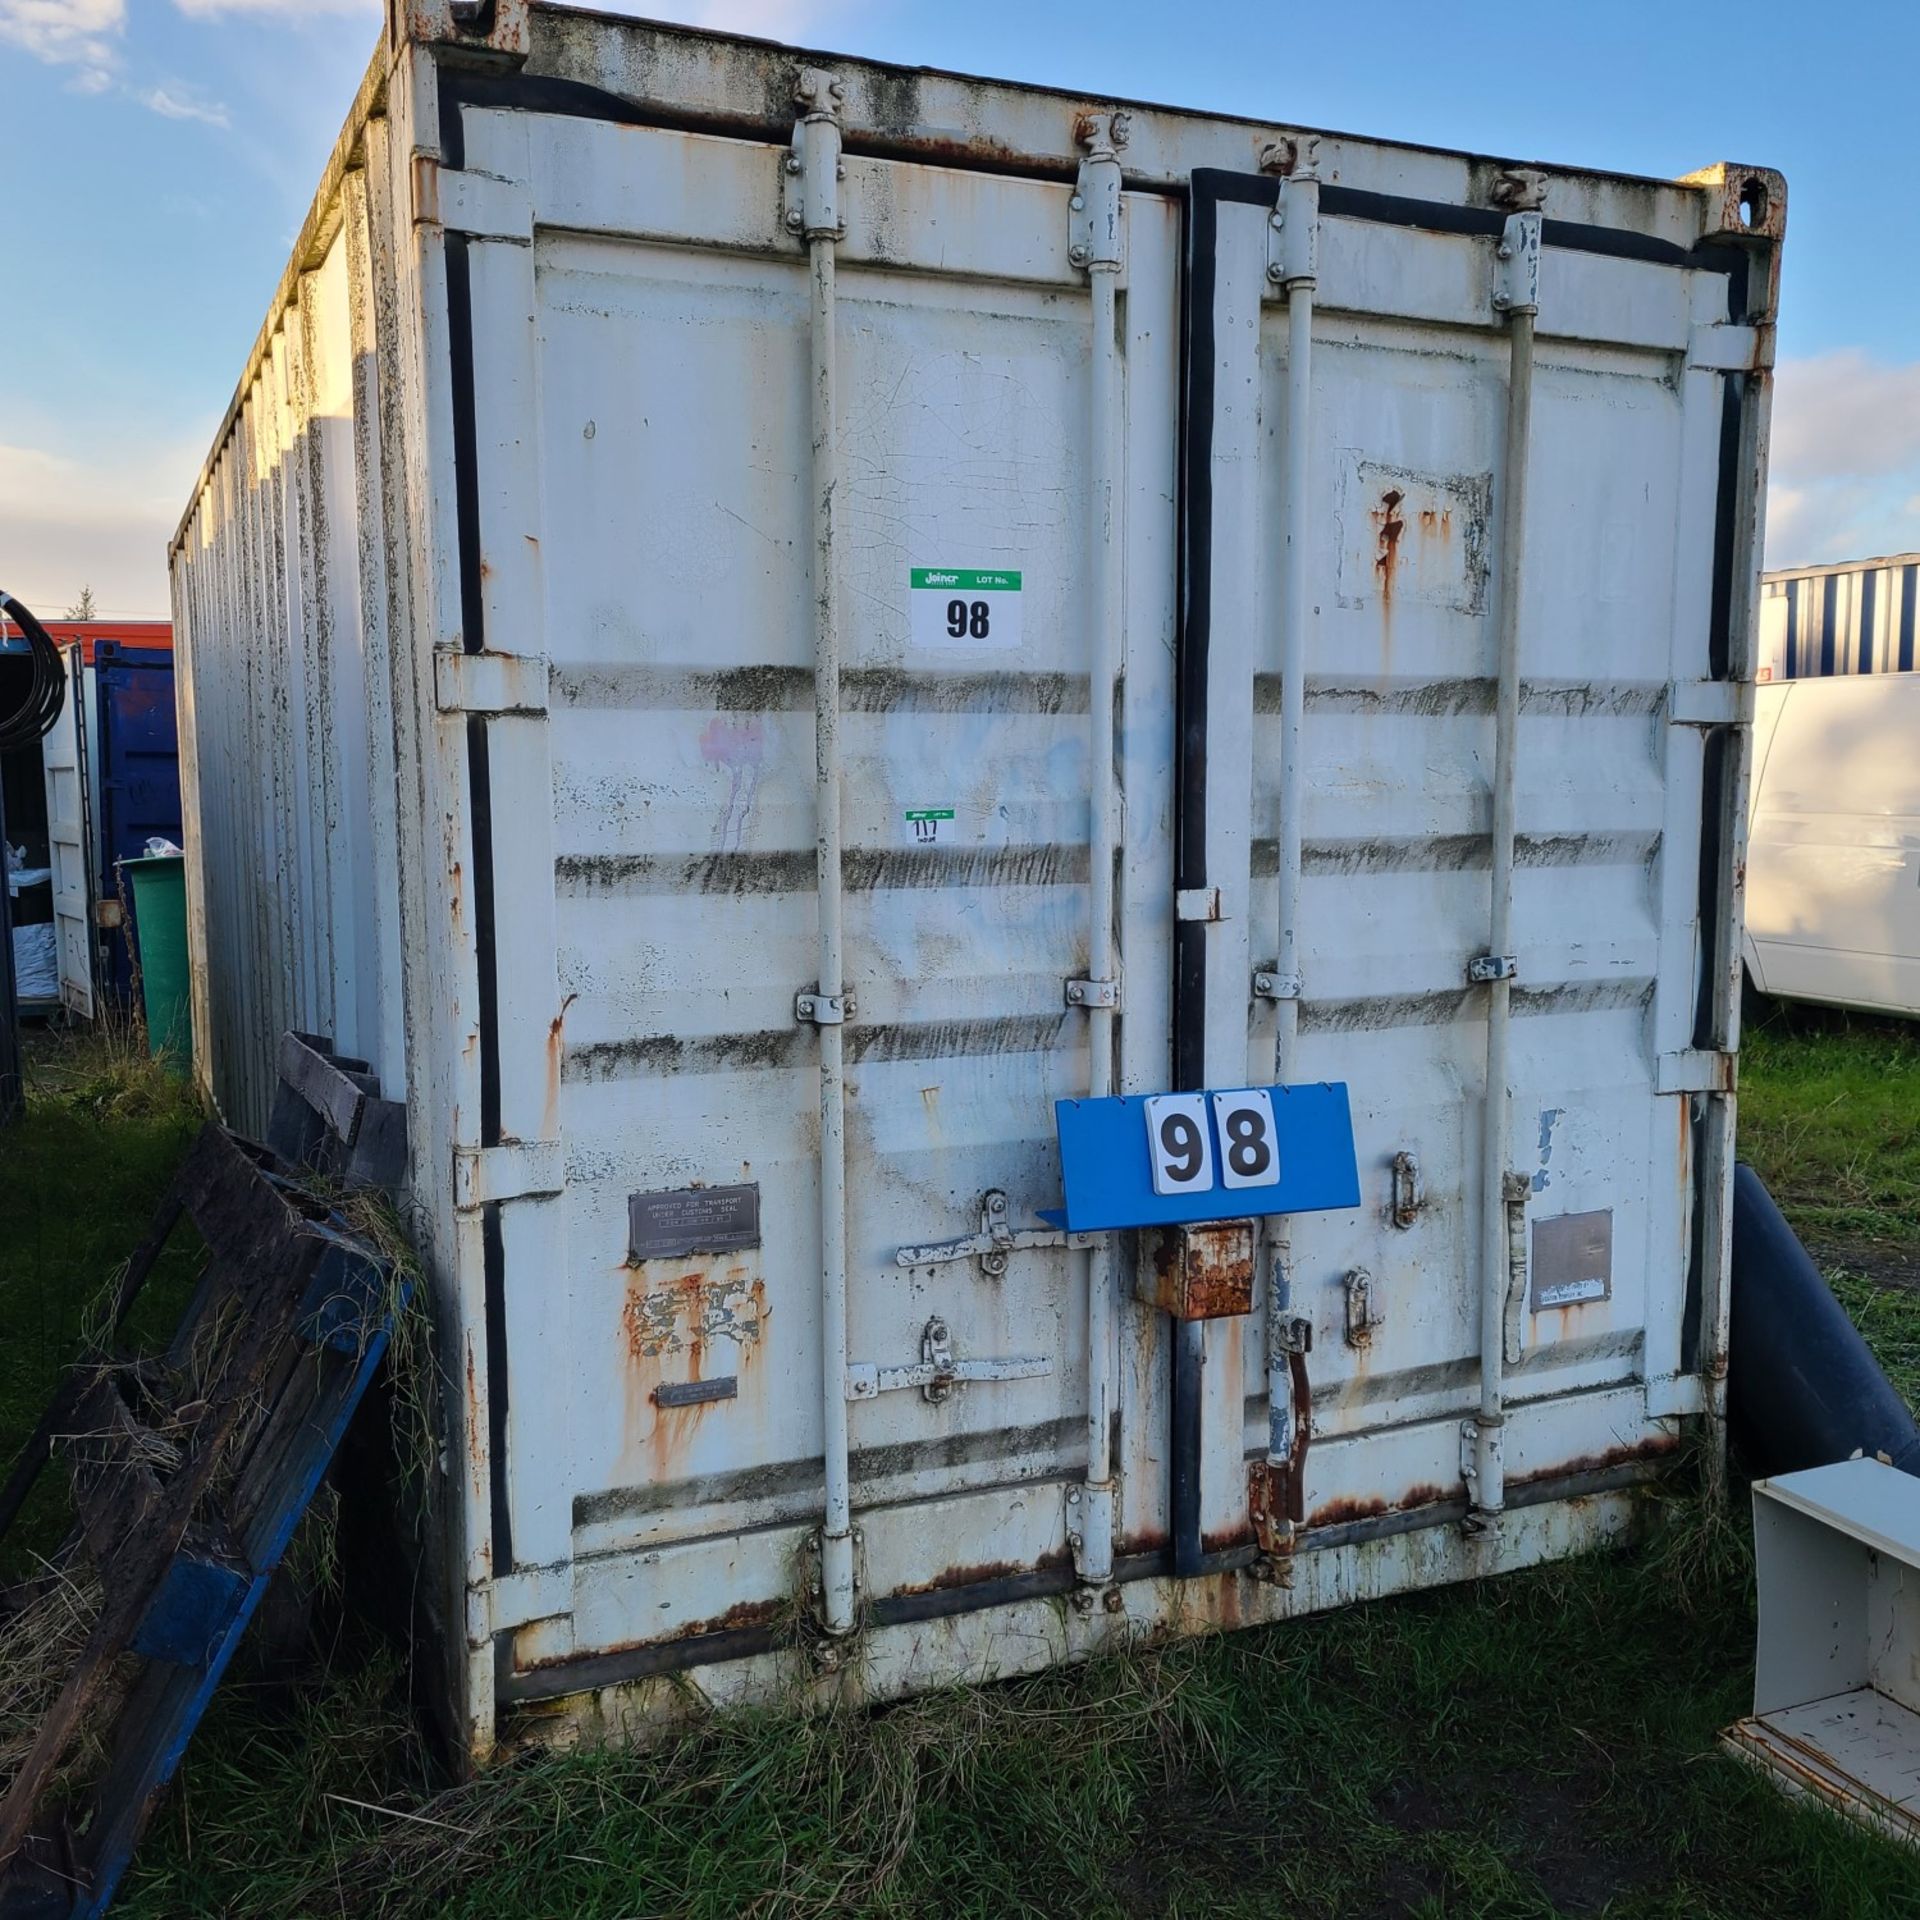 CONTAINER - 20 FT. SEACAN - DOES NOT INCLUDE CONTENTS (LOCATED OFFSITE AT 13216 HALE RD., PITT